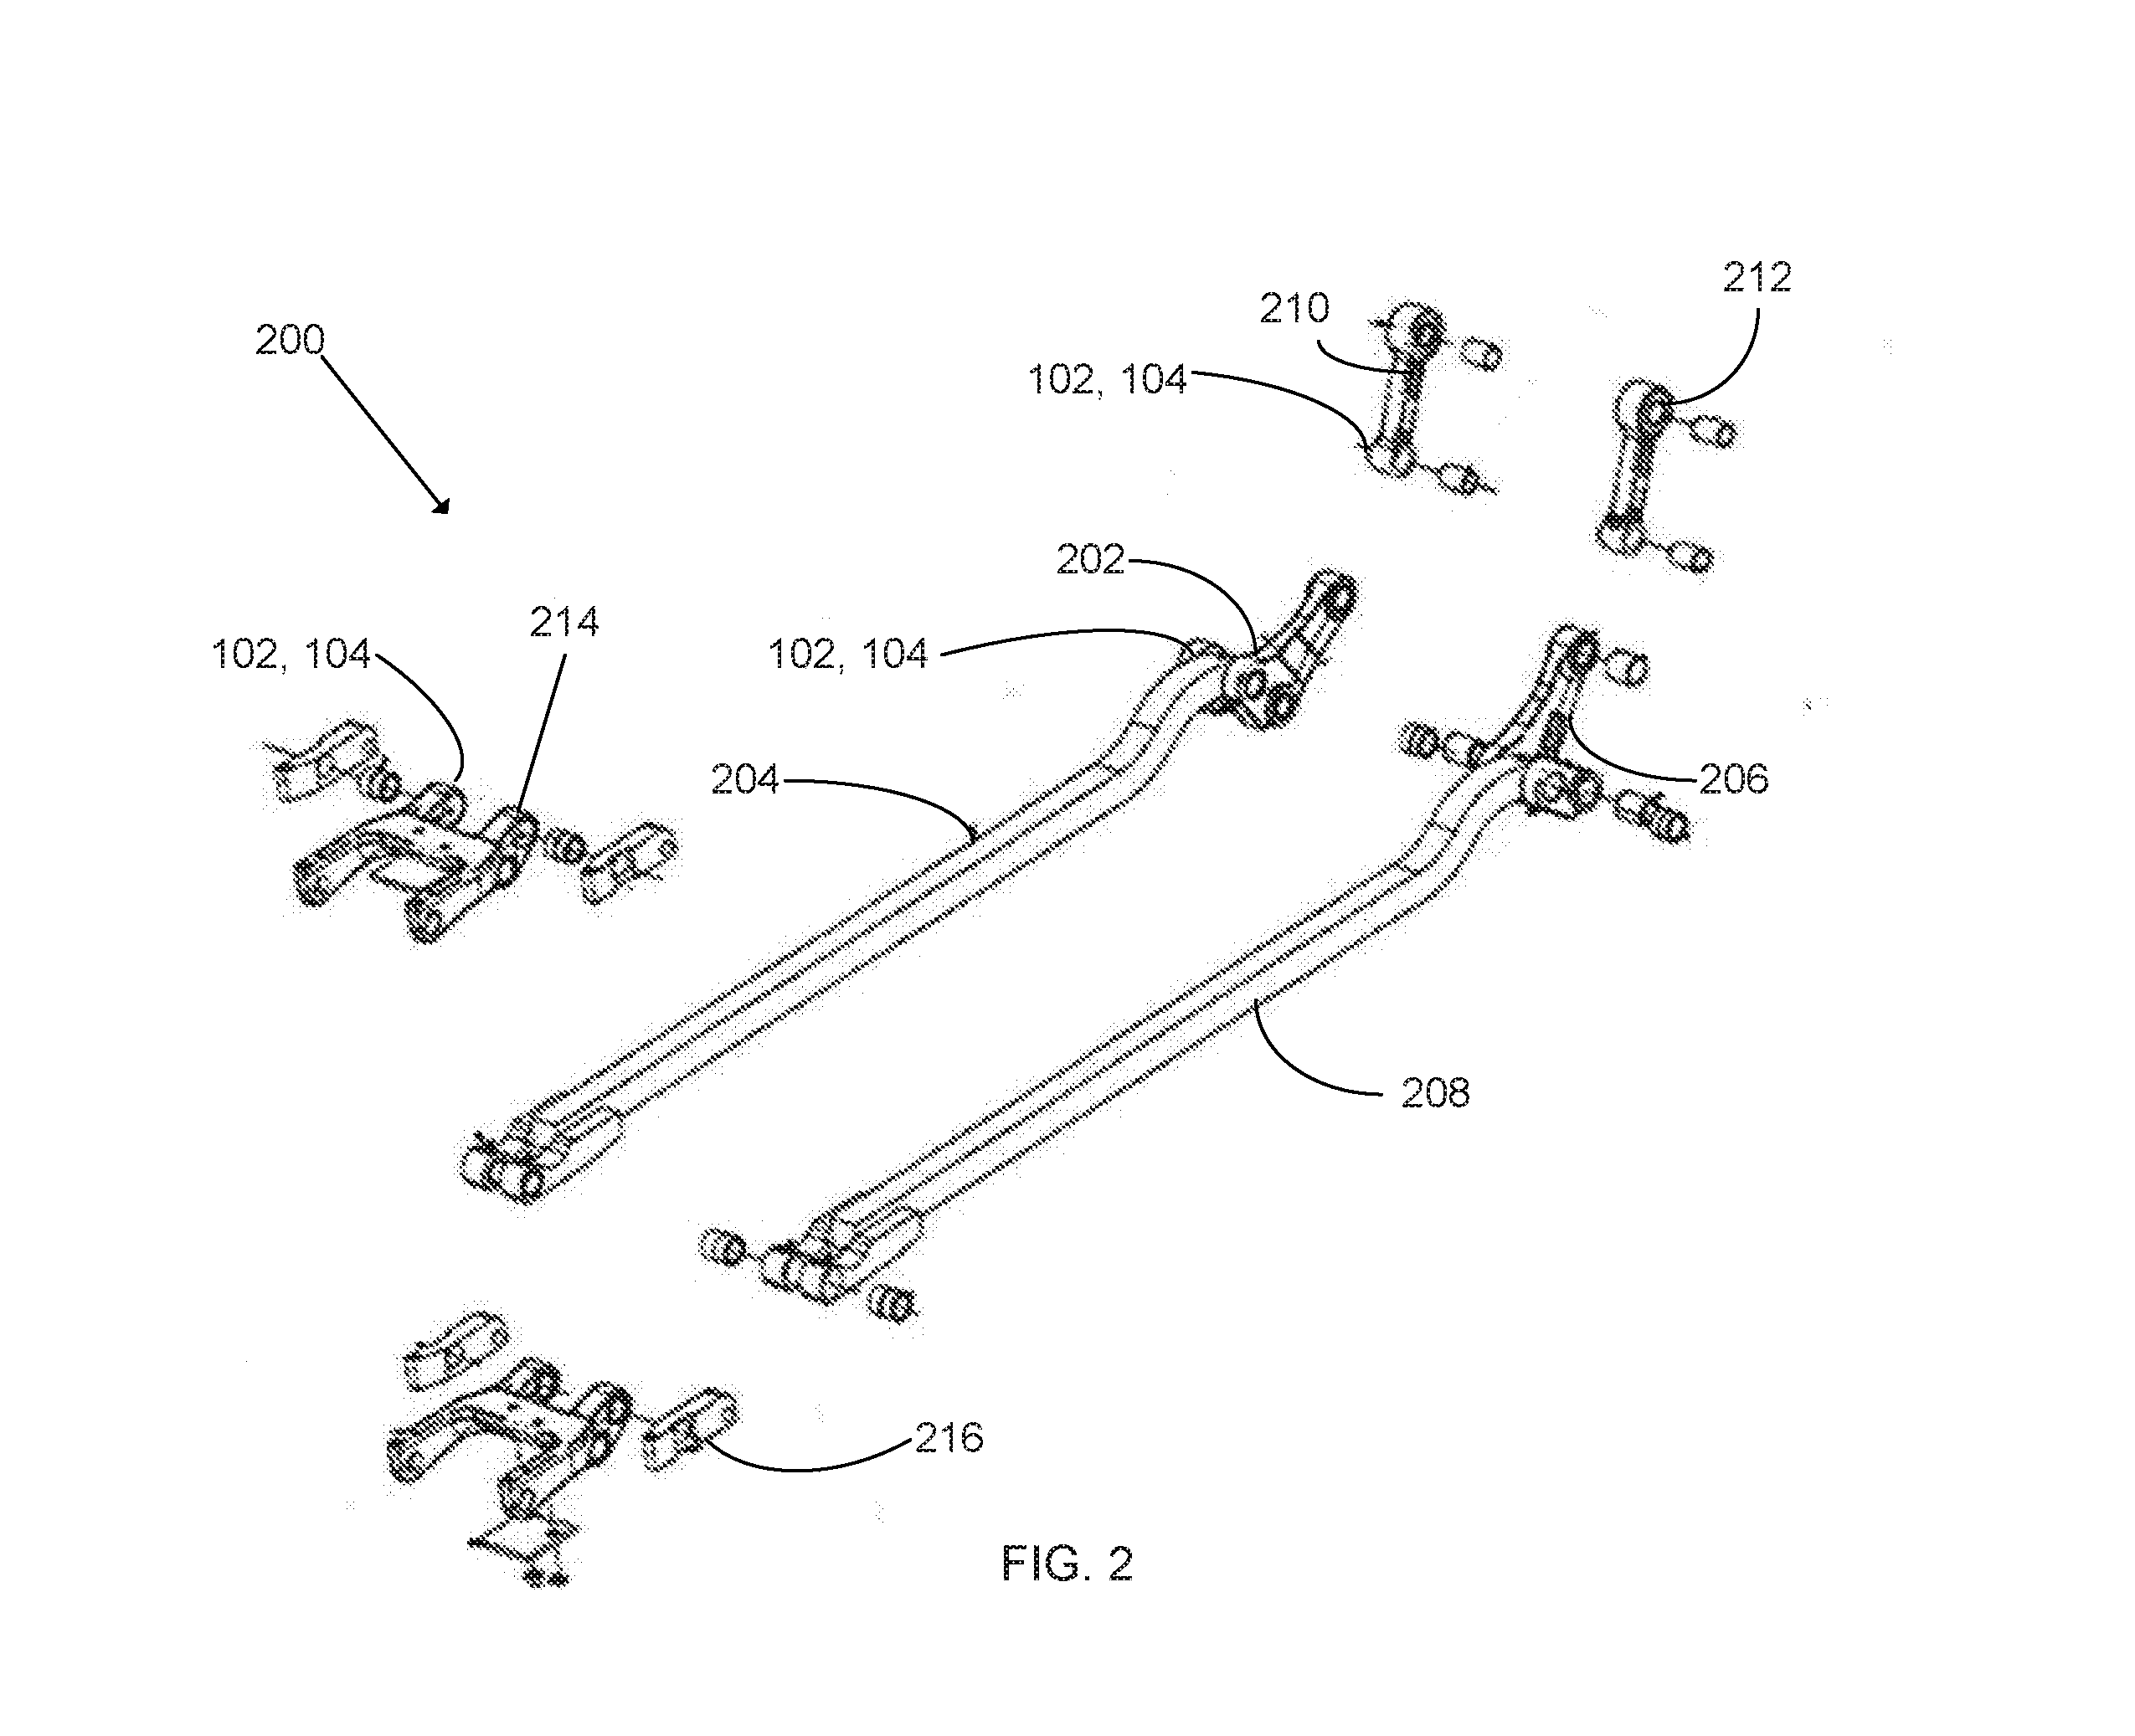 Systems and methods for weight determination and closed loop speed control